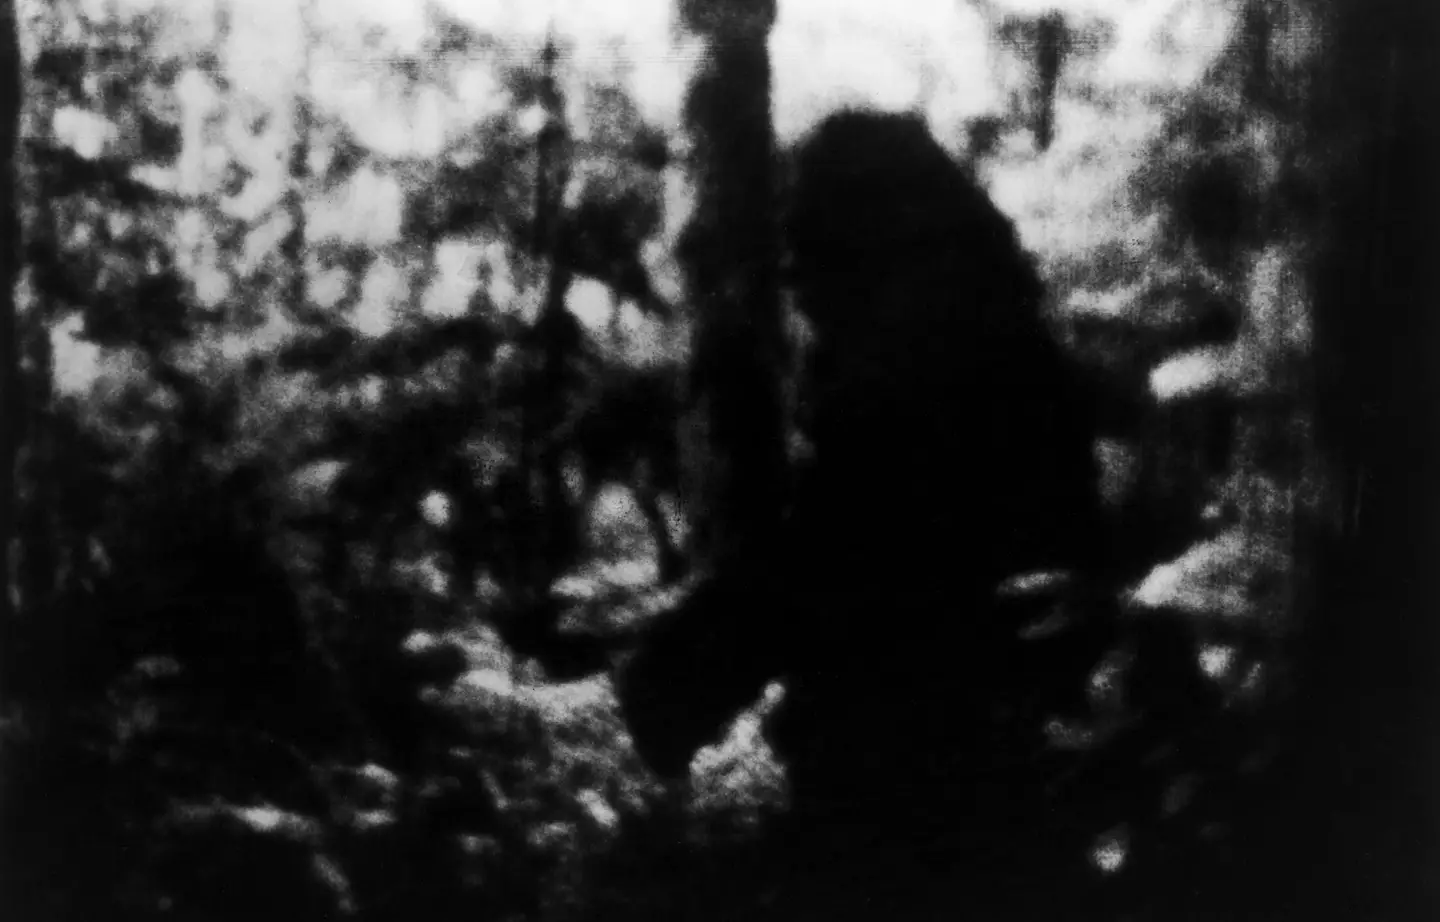 A purported Bigfoot sighting in 1967.